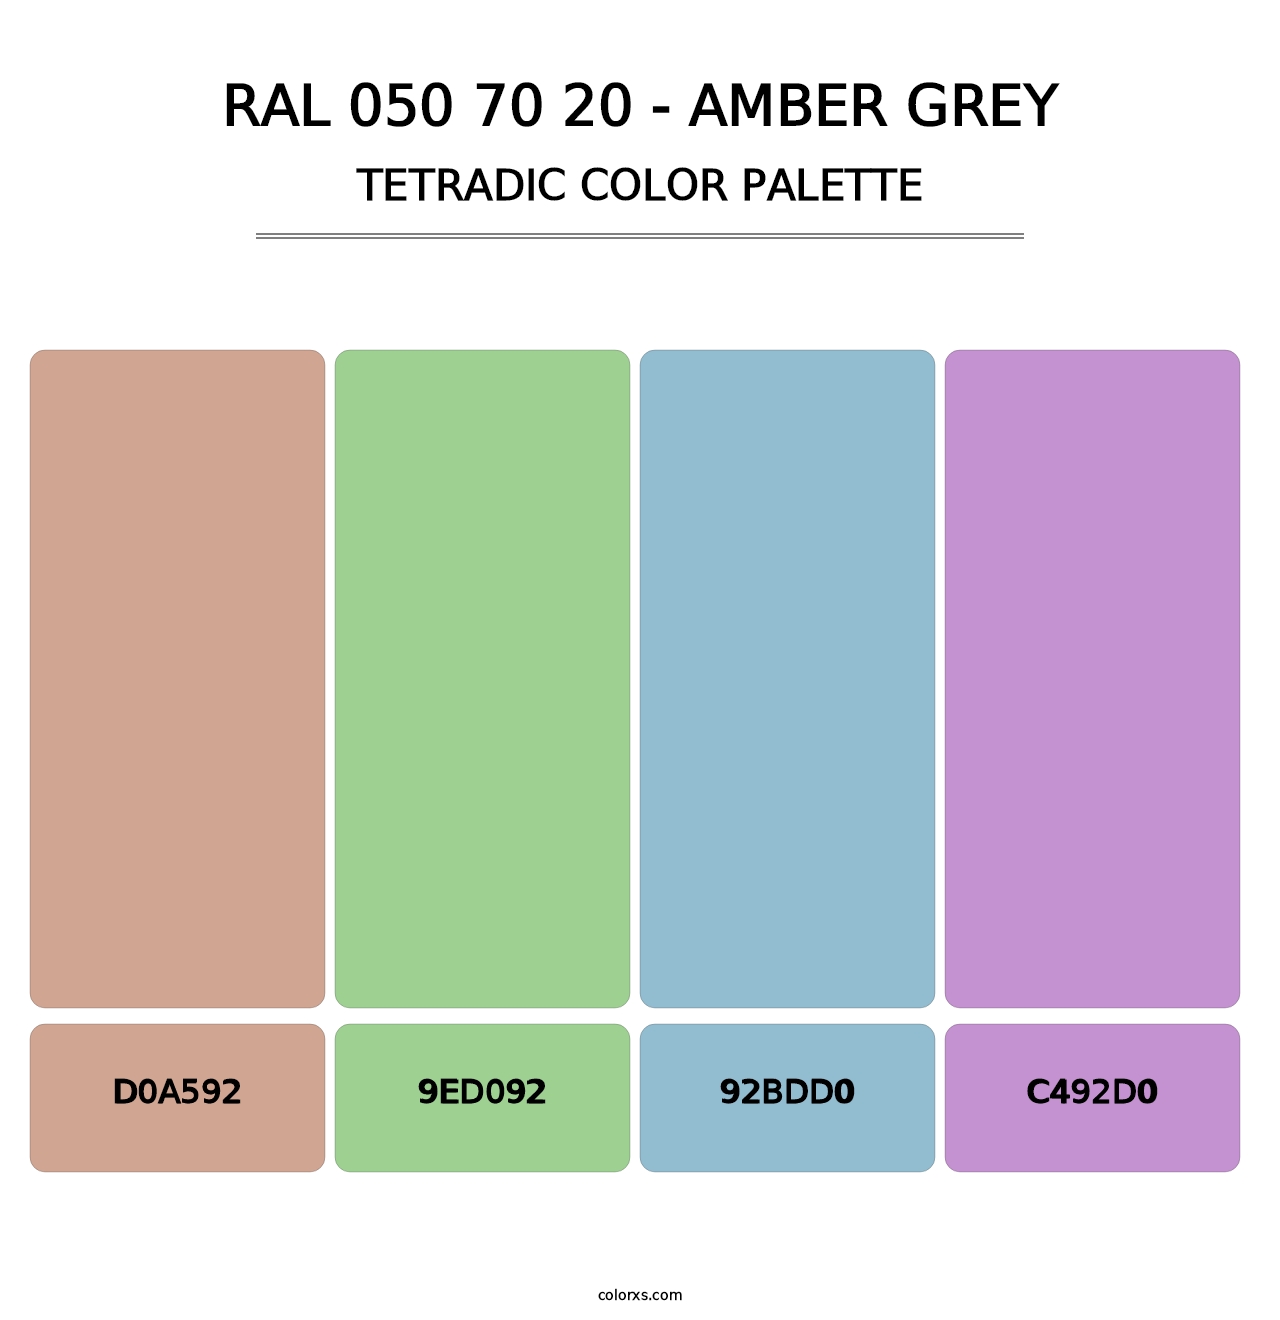 RAL 050 70 20 - Amber Grey - Tetradic Color Palette